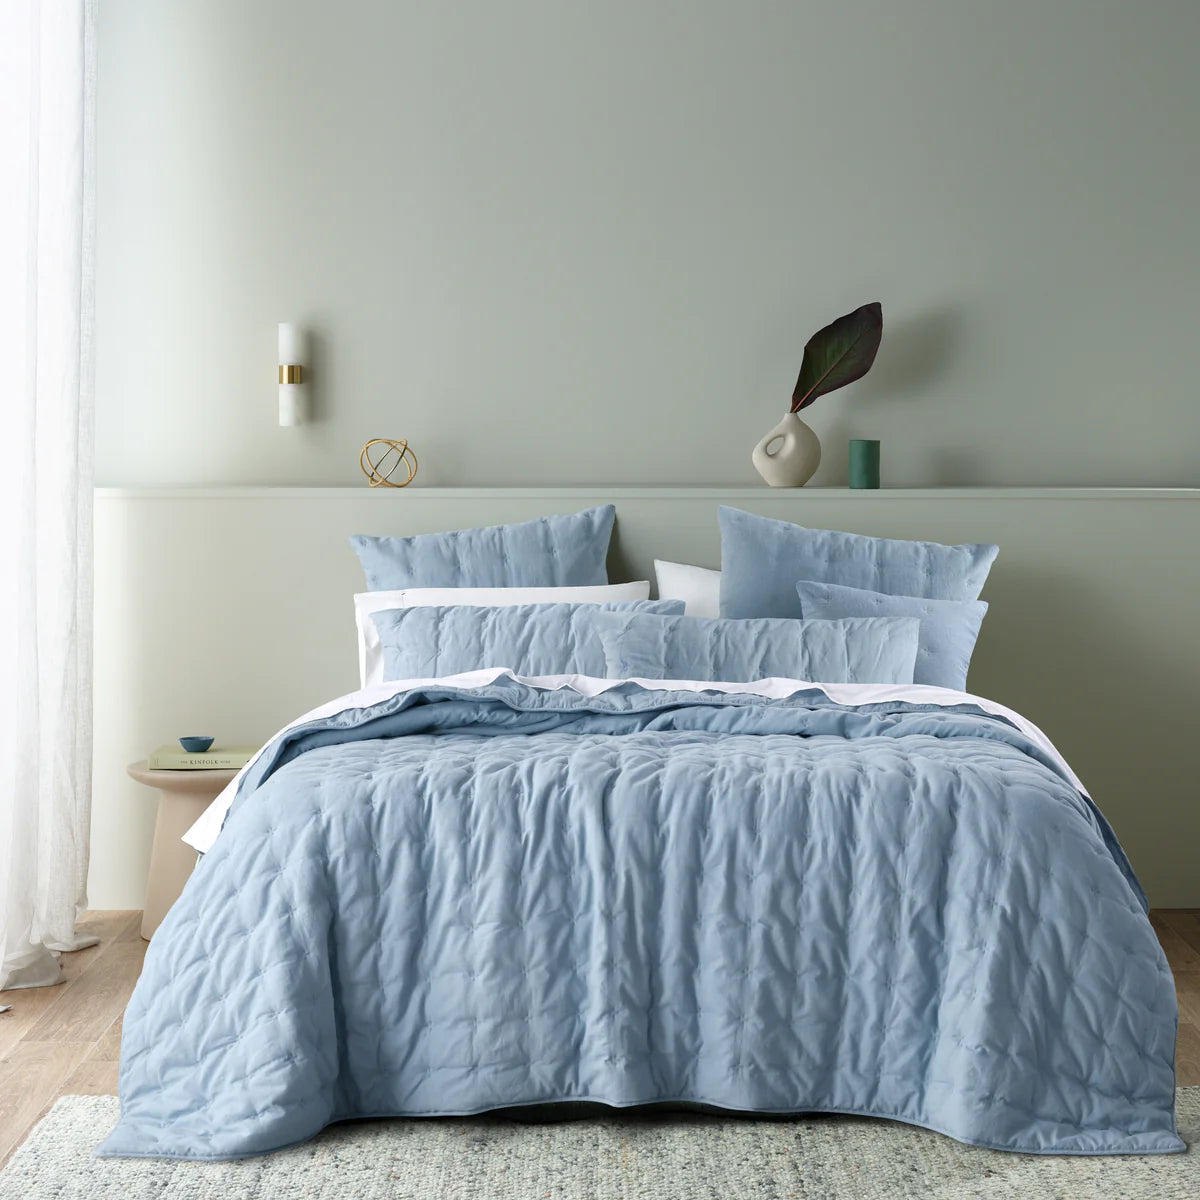 Add some sophistication to your bedroom with the Langston comforter set. Our linen/cotton fabrics are pre-washed, pre-shrunk and continue to become softer after laundering and daily use.